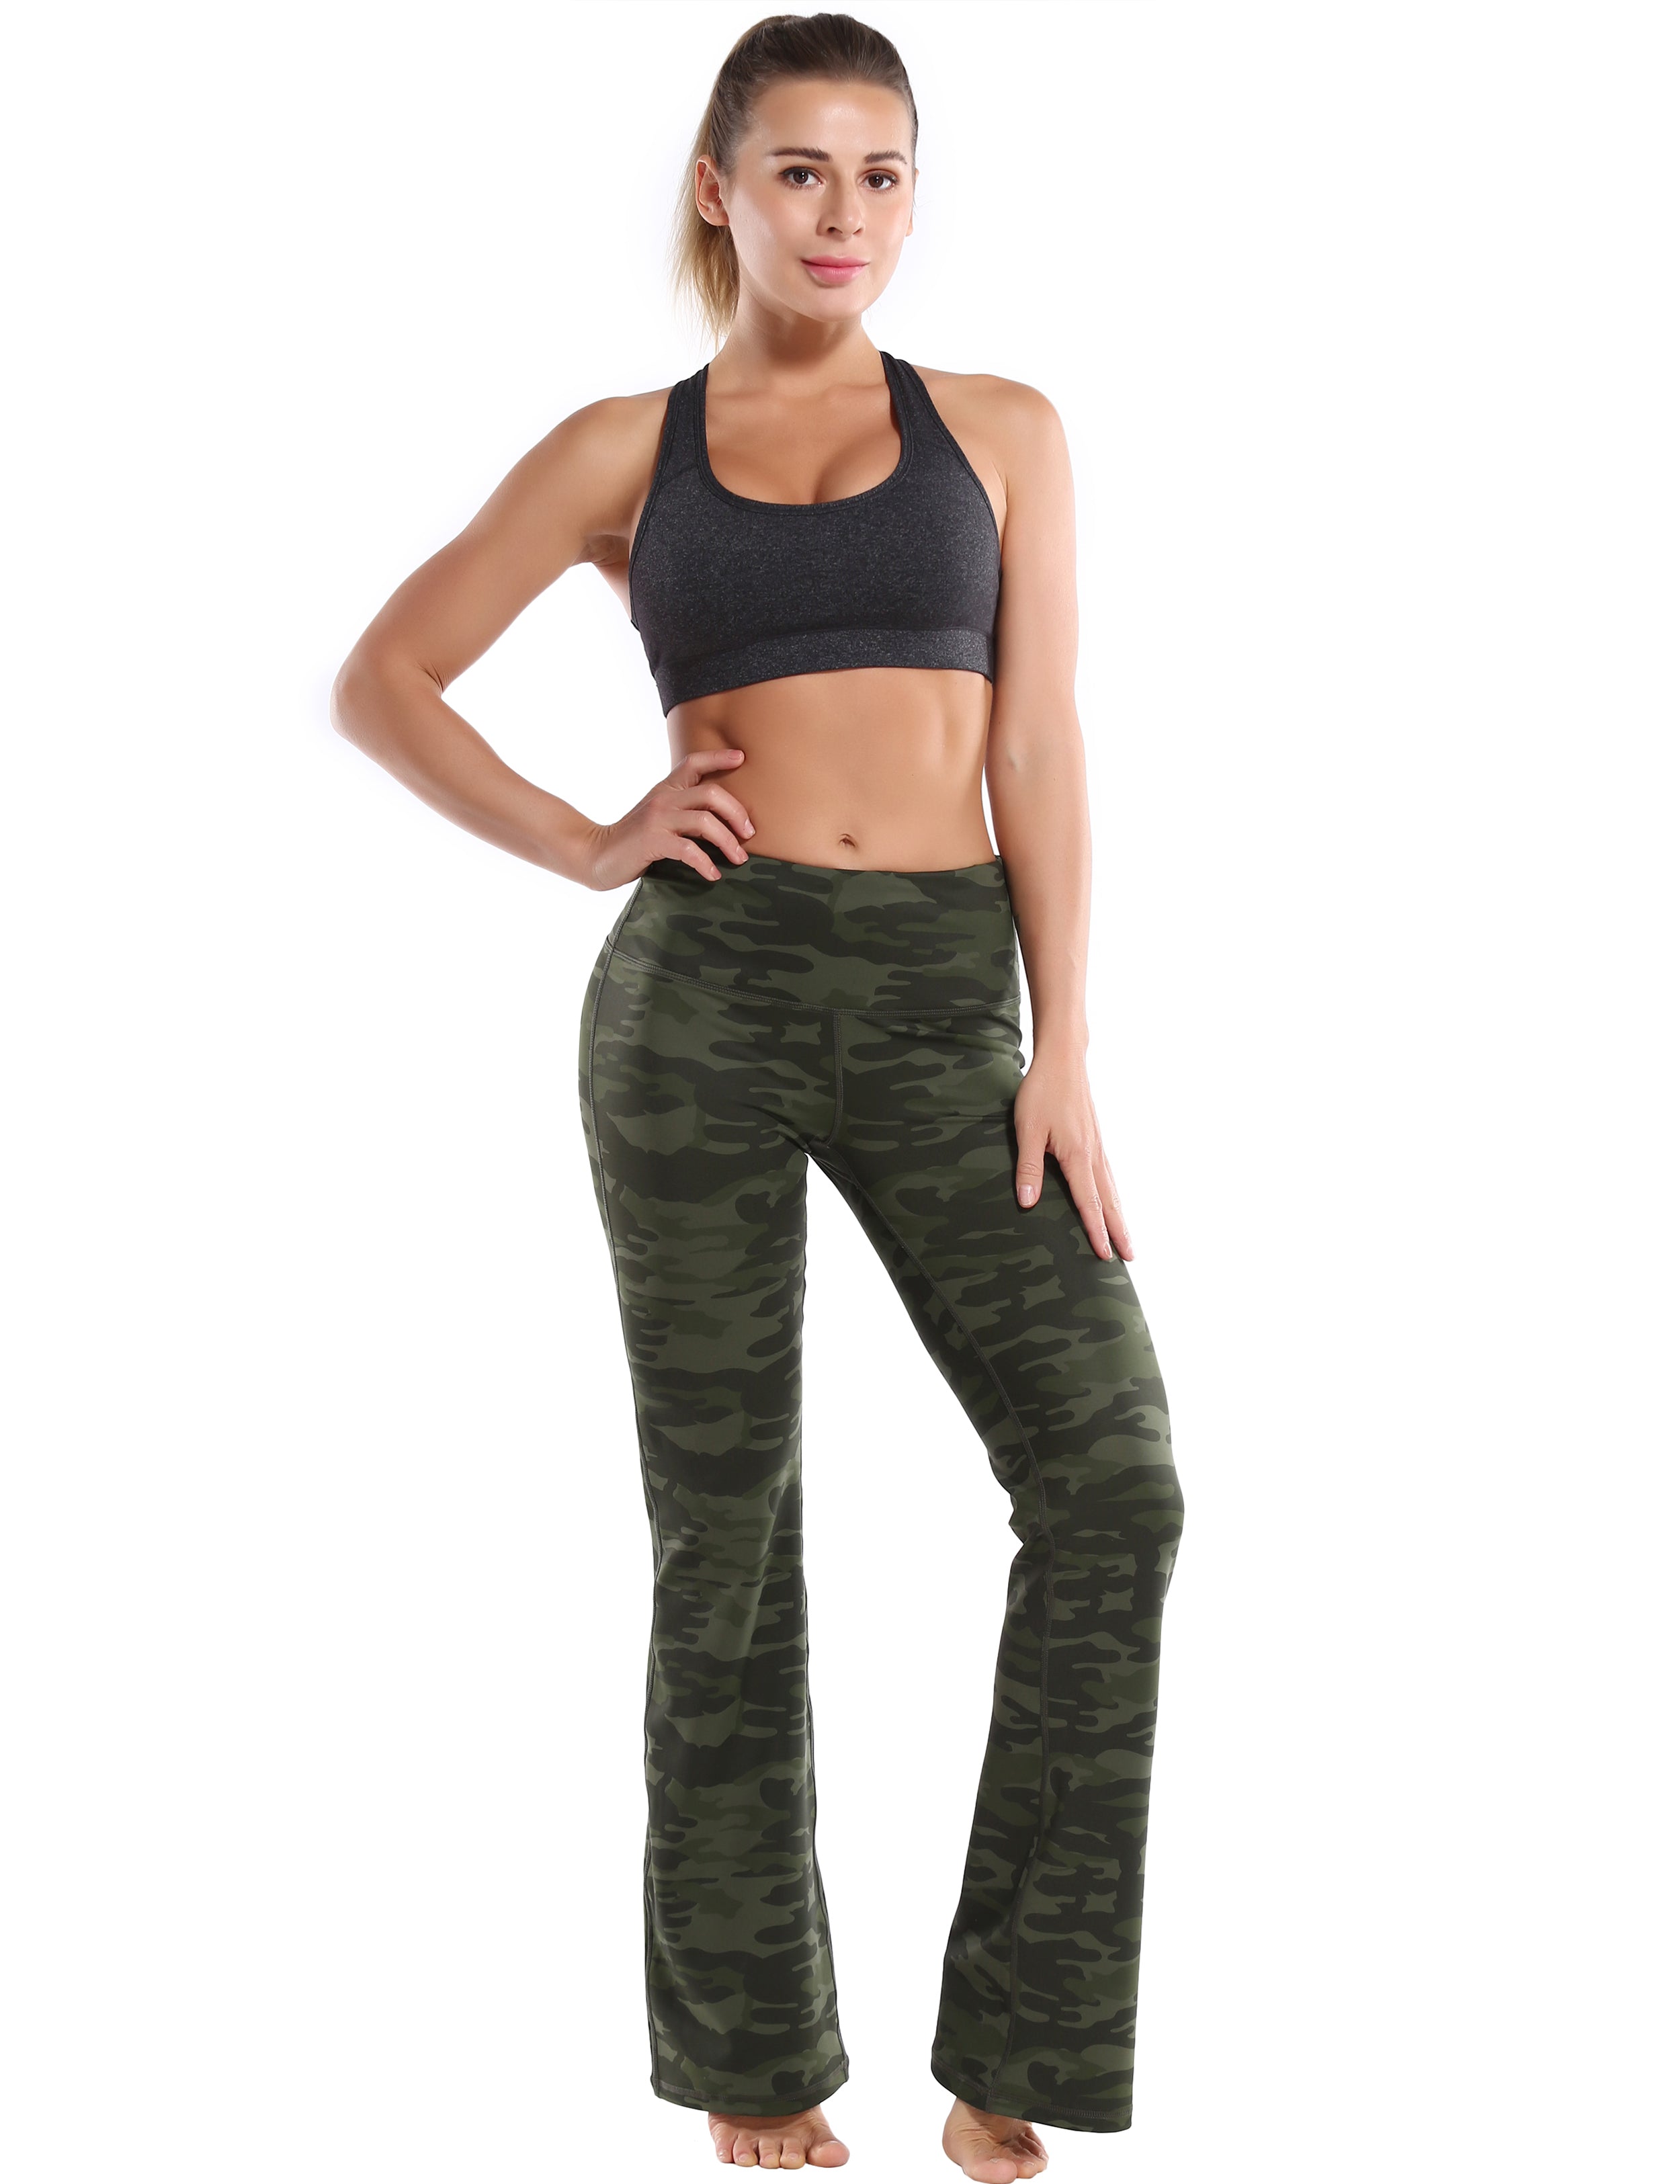 High Waist Printed Bootcut Leggings green camo 78%Polyester/22%Spandex Fabric doesn't attract lint easily 4-way stretch No see-through Moisture-wicking Tummy control Inner pocket Five lengths